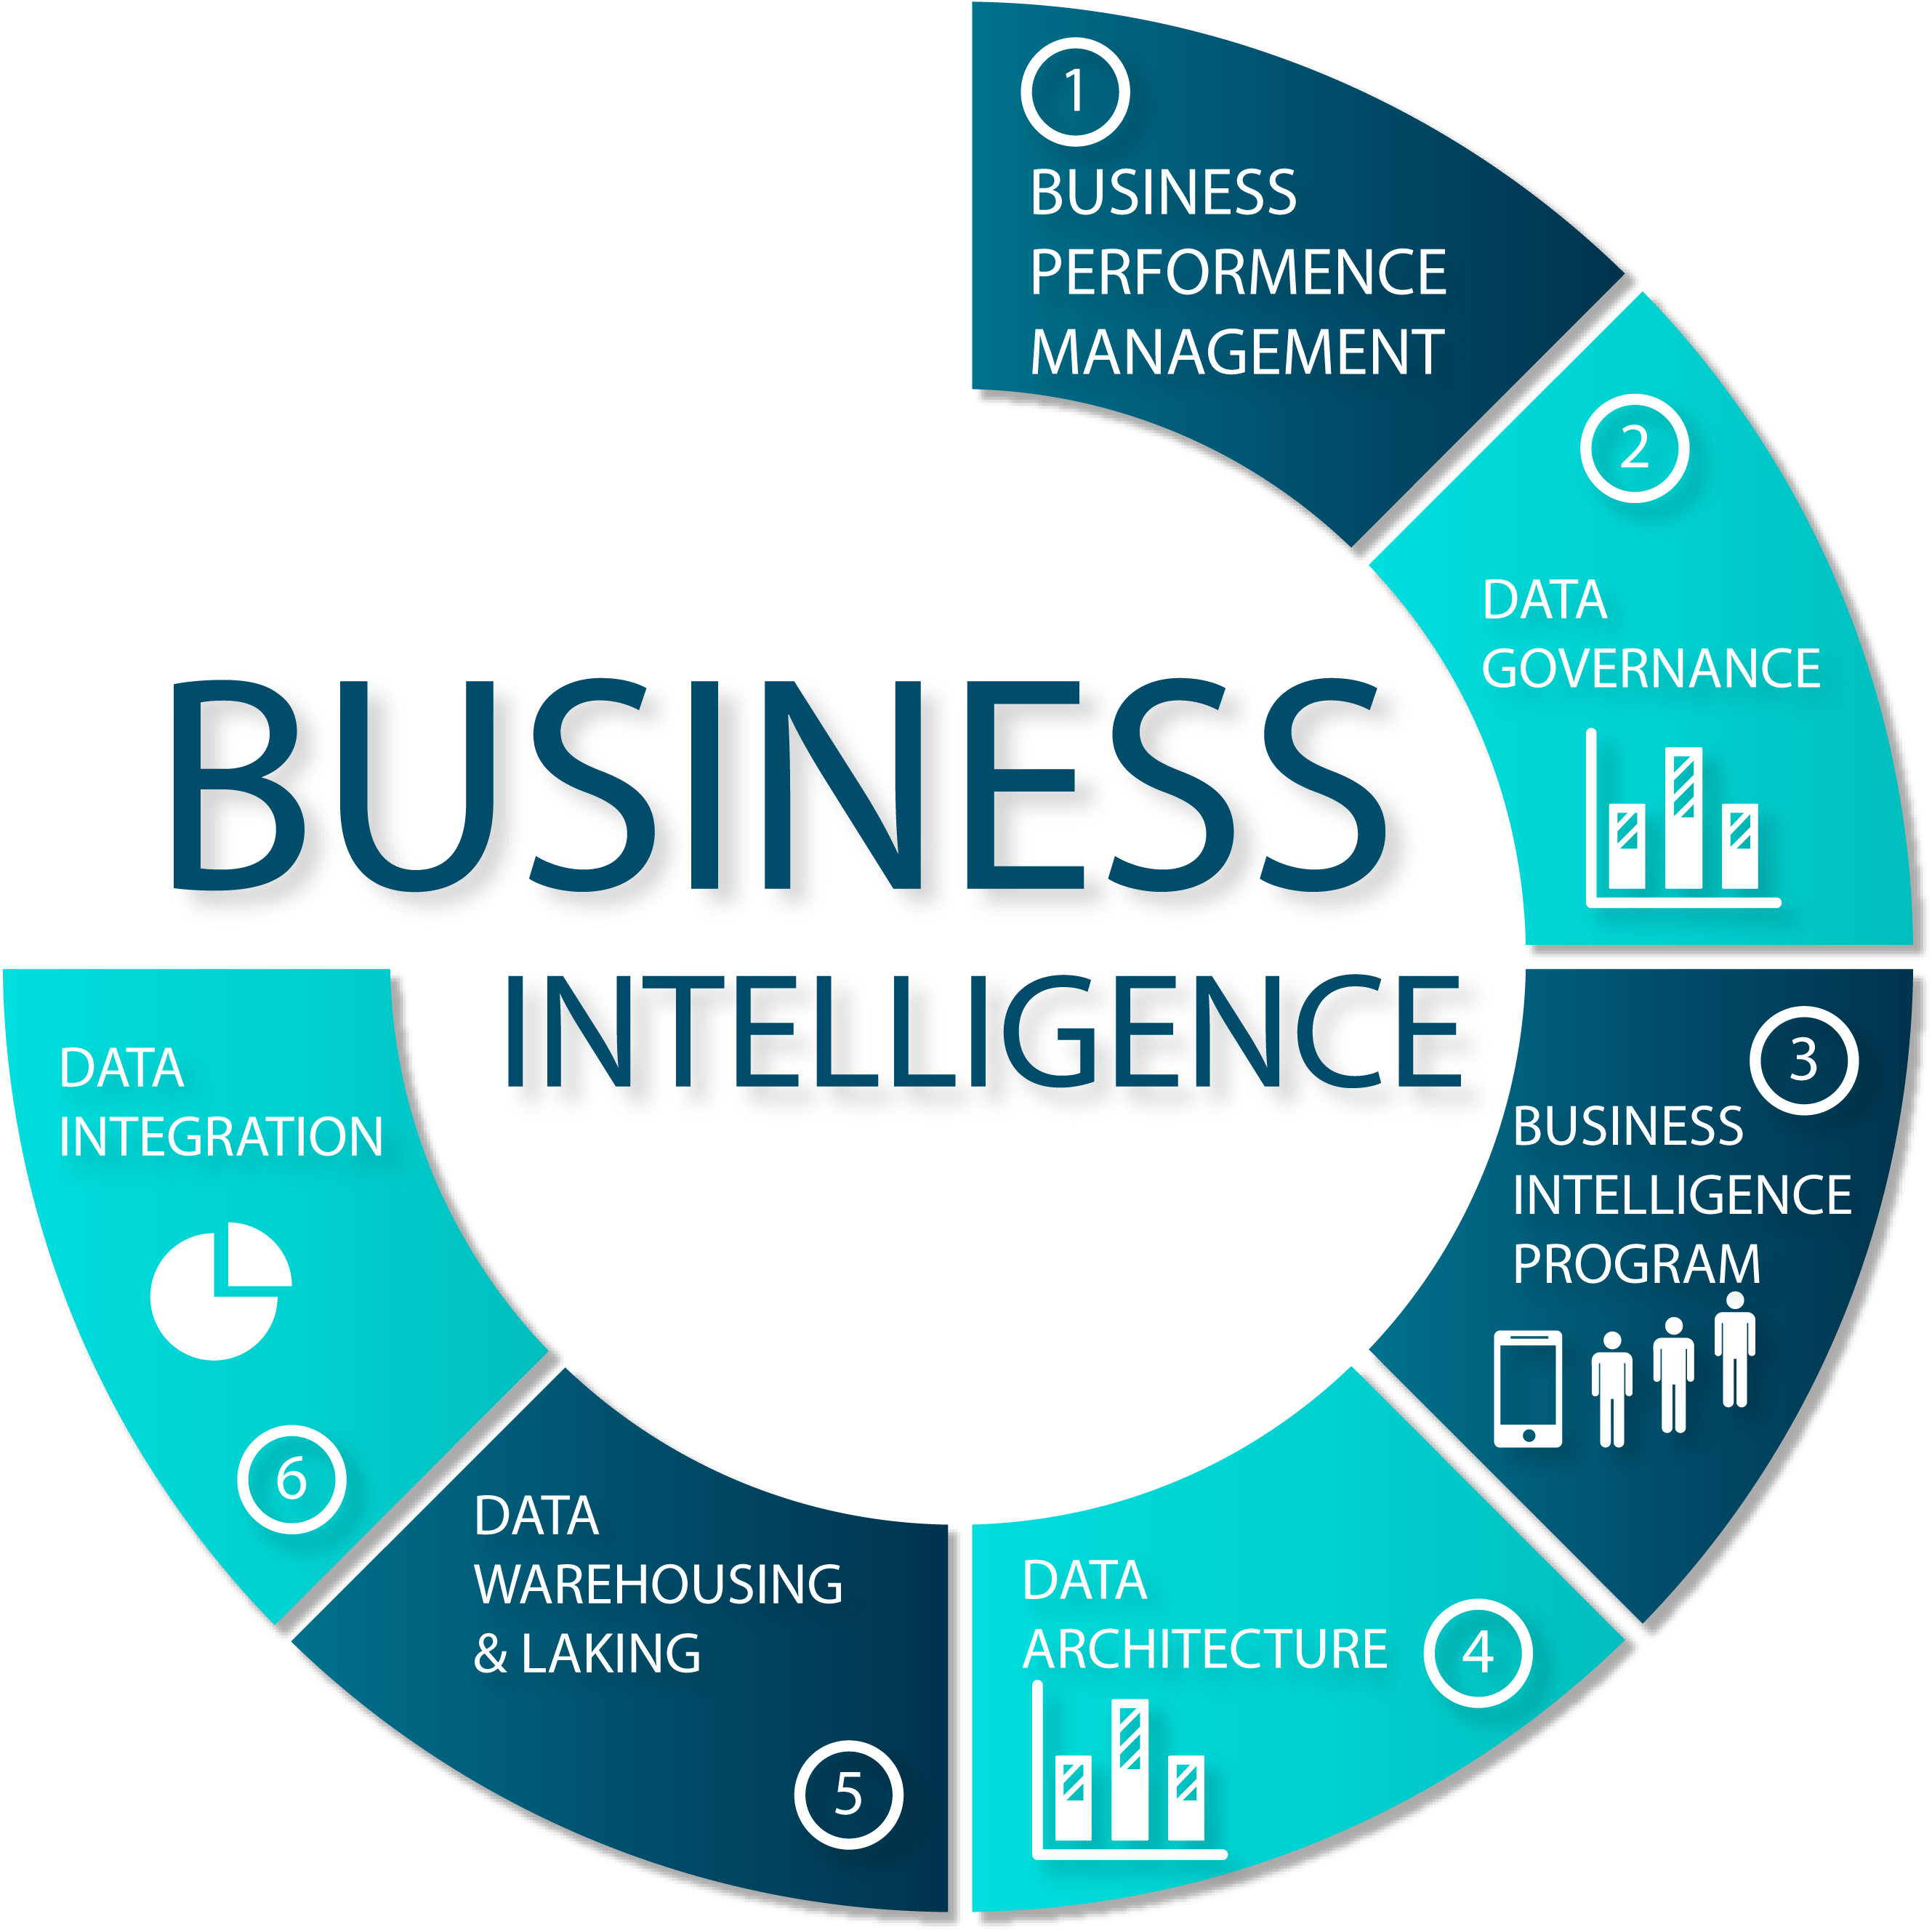 Bilytica # 1 is one of the top Business Intelligence in Saudi Arabia and plays a crucial role in enabling organizations to